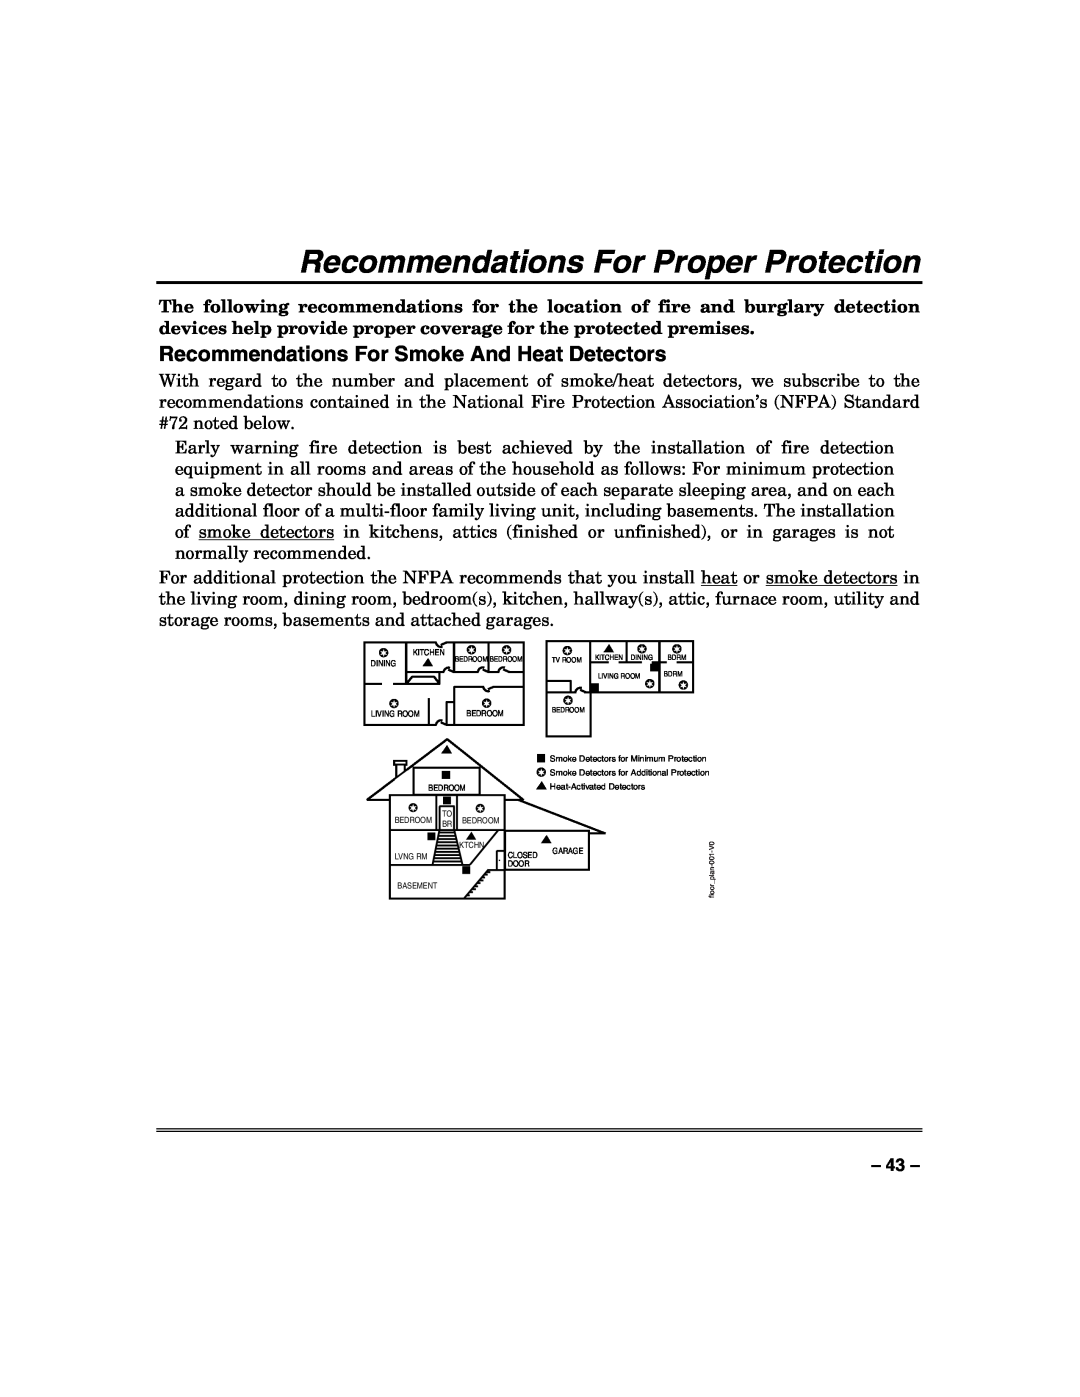 Honeywell N7003V3 manual Recommendations For Proper Protection, Recommendations For Smoke And Heat Detectors 